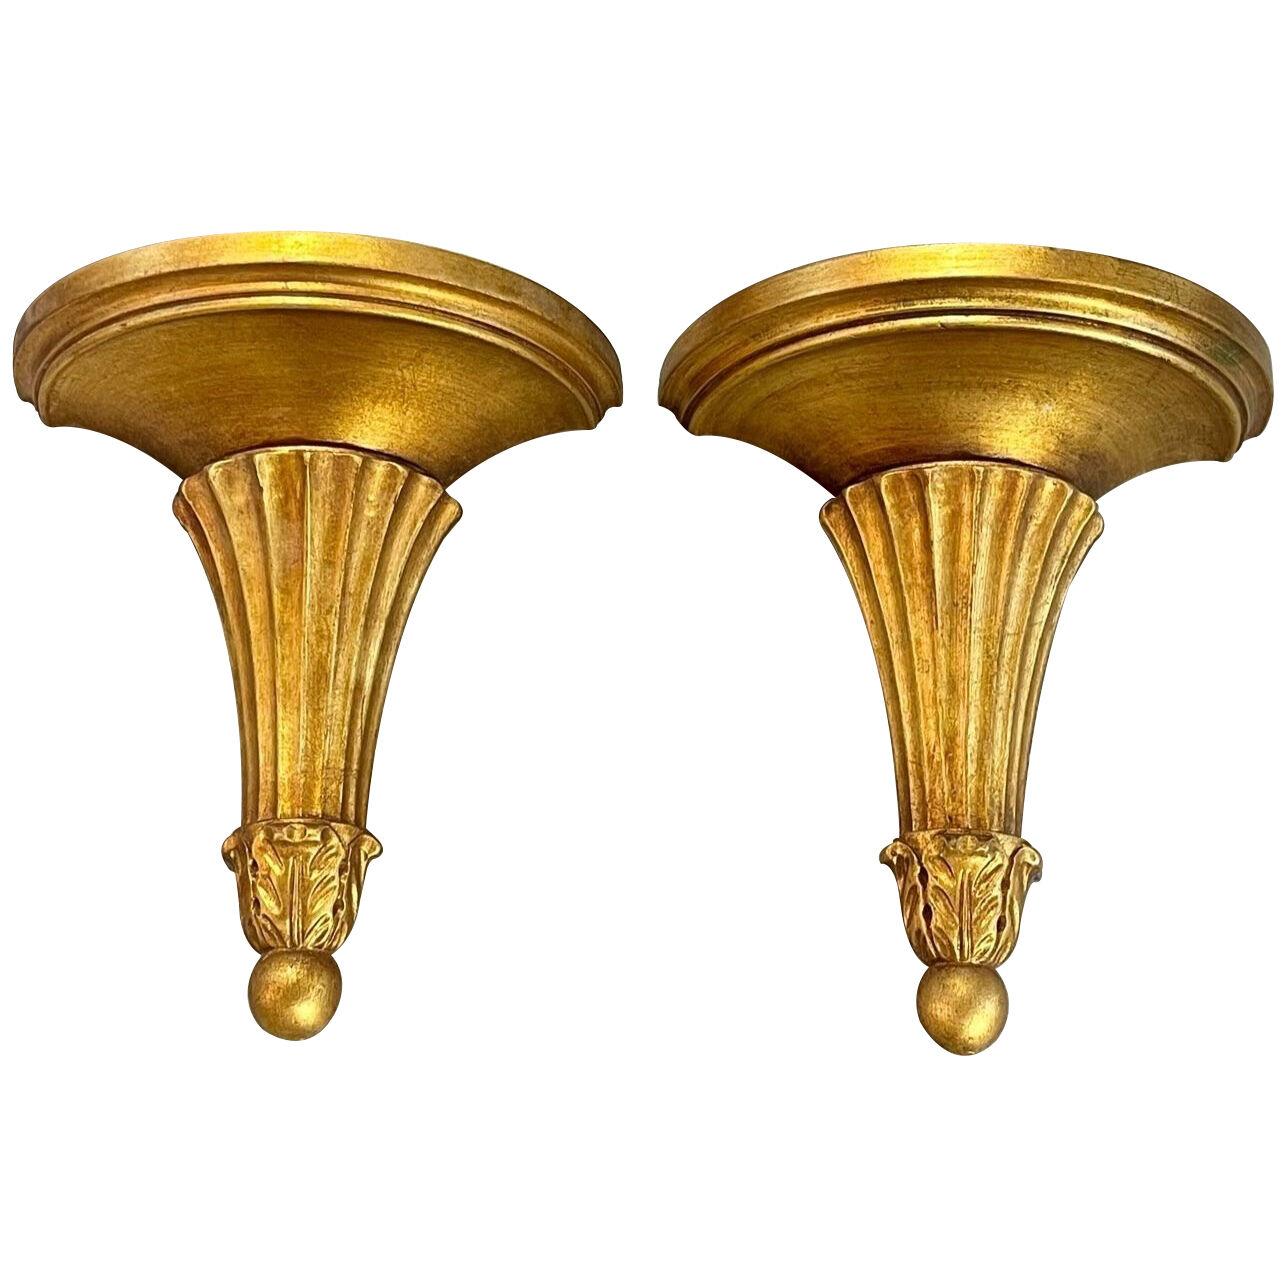 Vintage Pair of Italian Giltwood Classical Wall Brackets